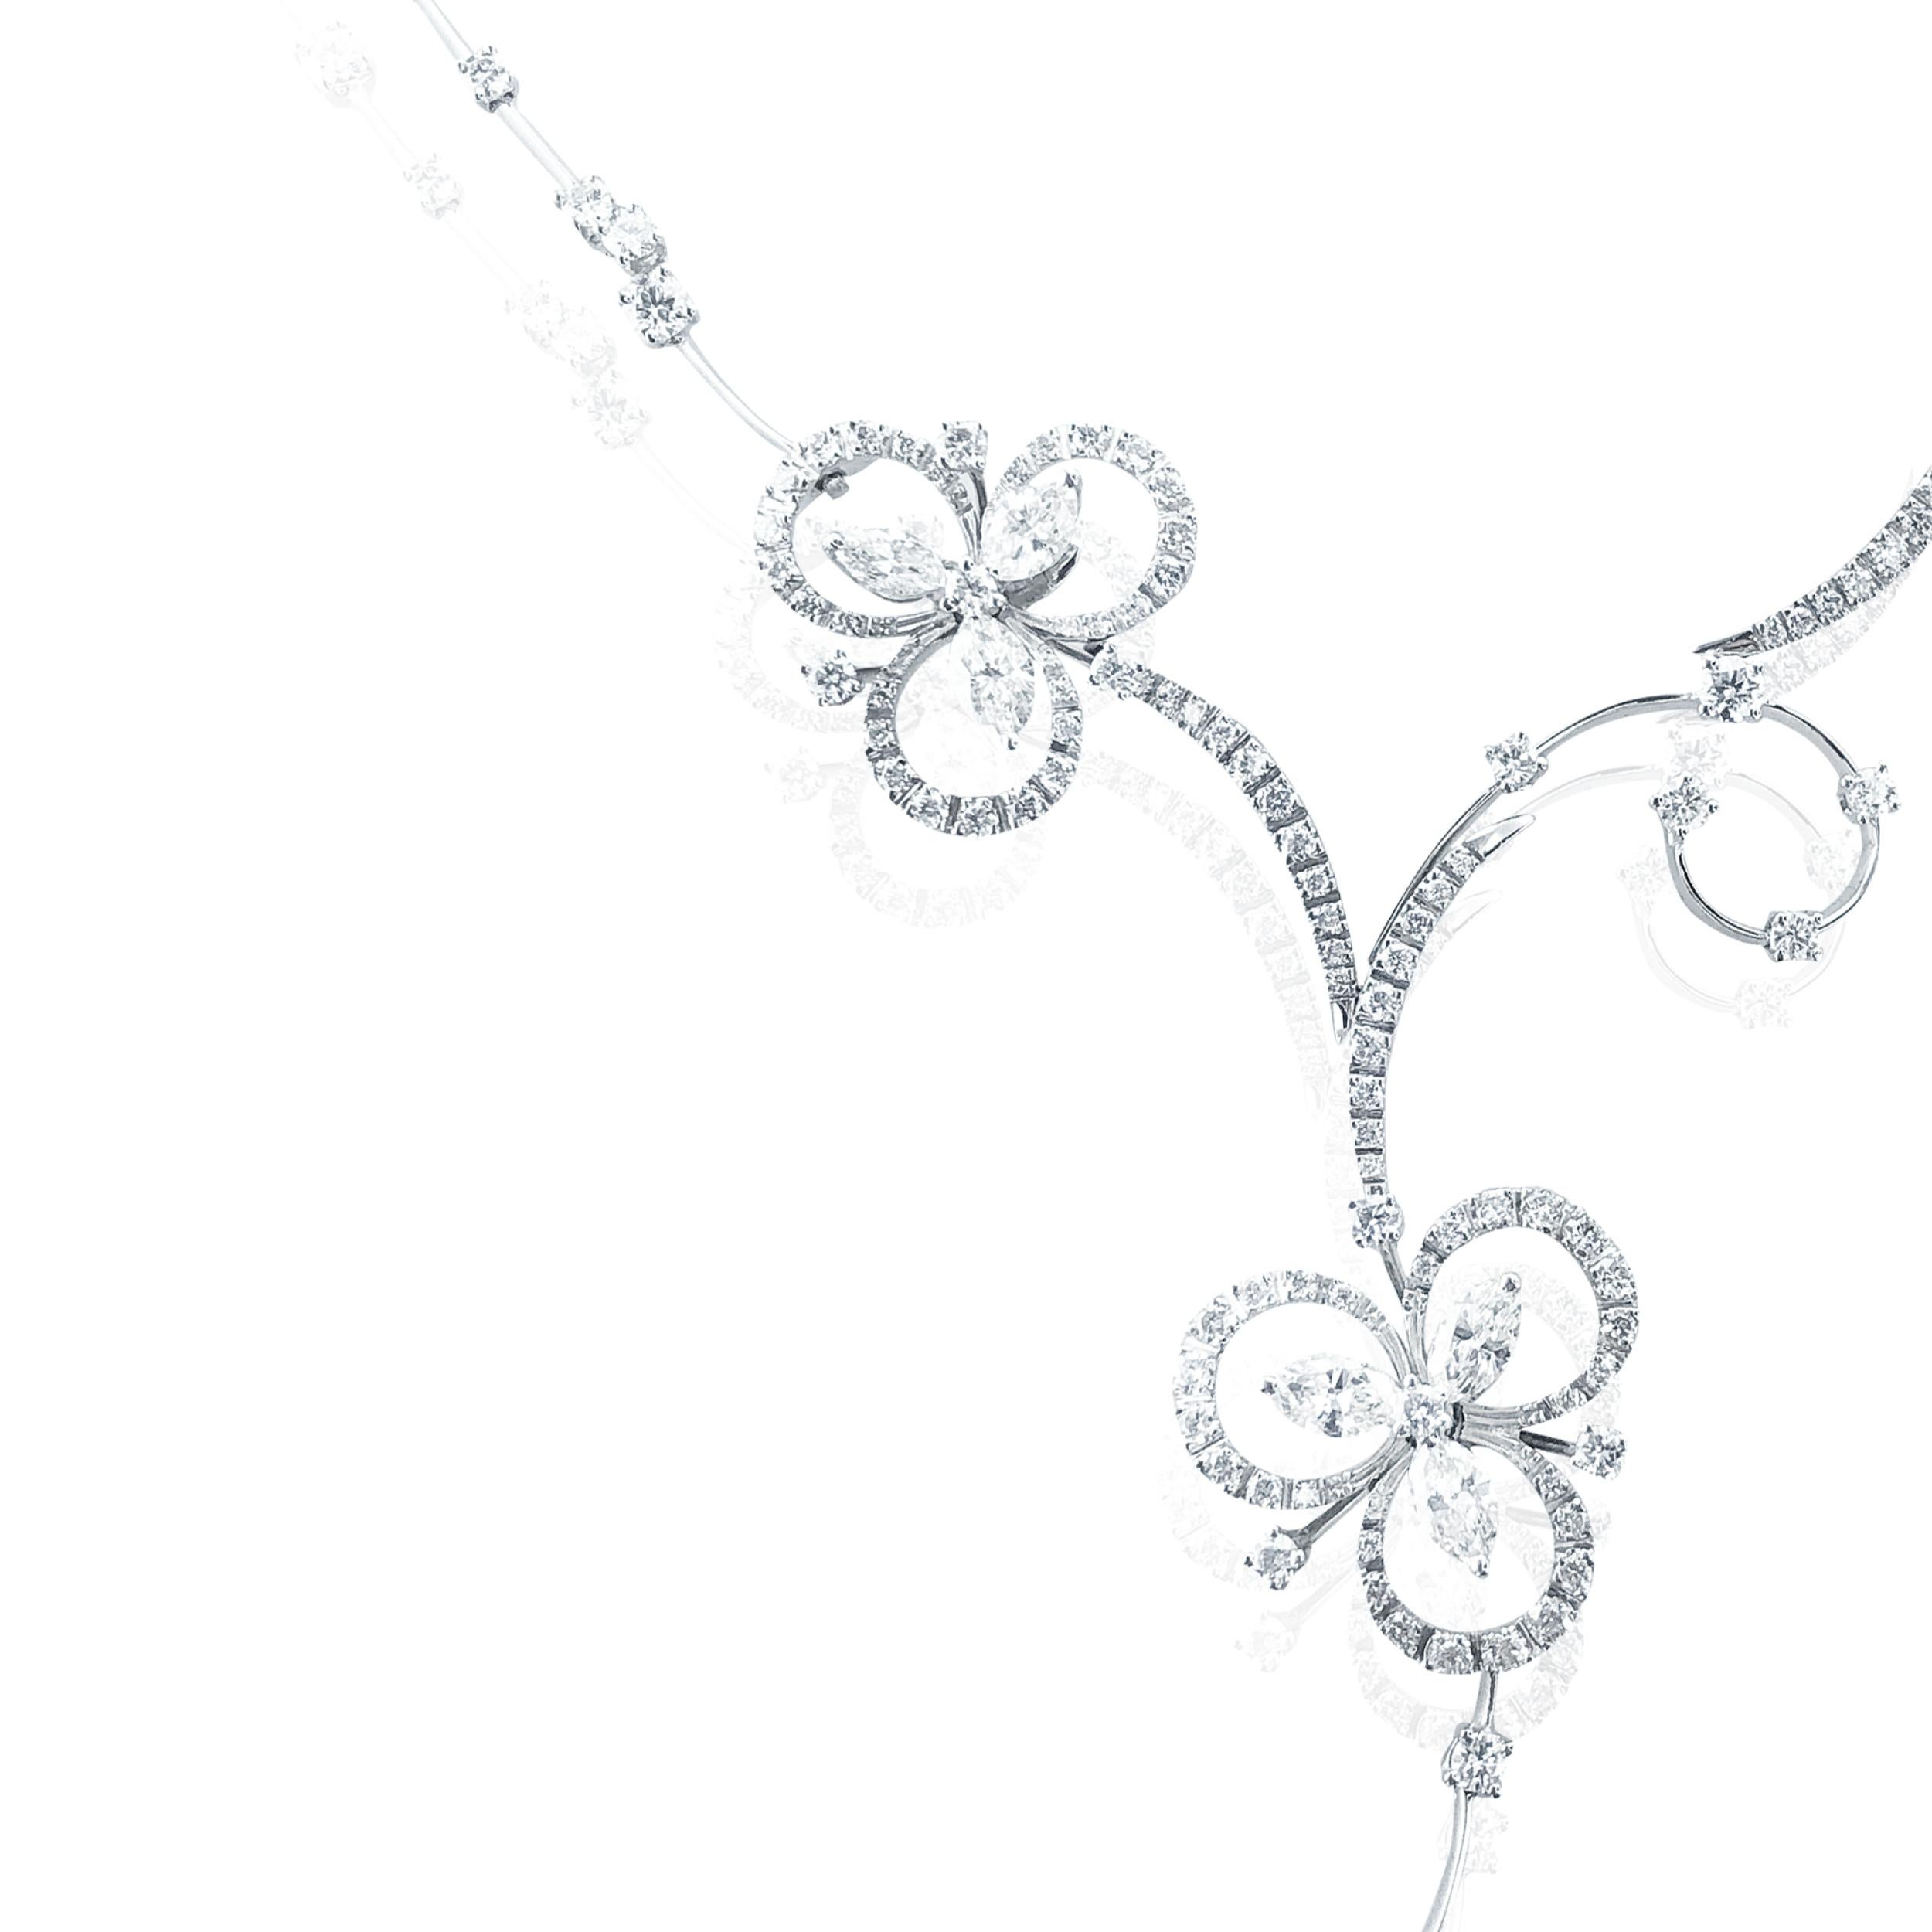 This Stefan Hafner 6.40 Carat 18kt White Gold Lucky Charm Diamond Necklace, is an exquisite and rare Diamond necklace boasting 6.40 Carats of Diamonds in an intricate and precious way.

A unique chain, somewhat similar to a long and short bulk